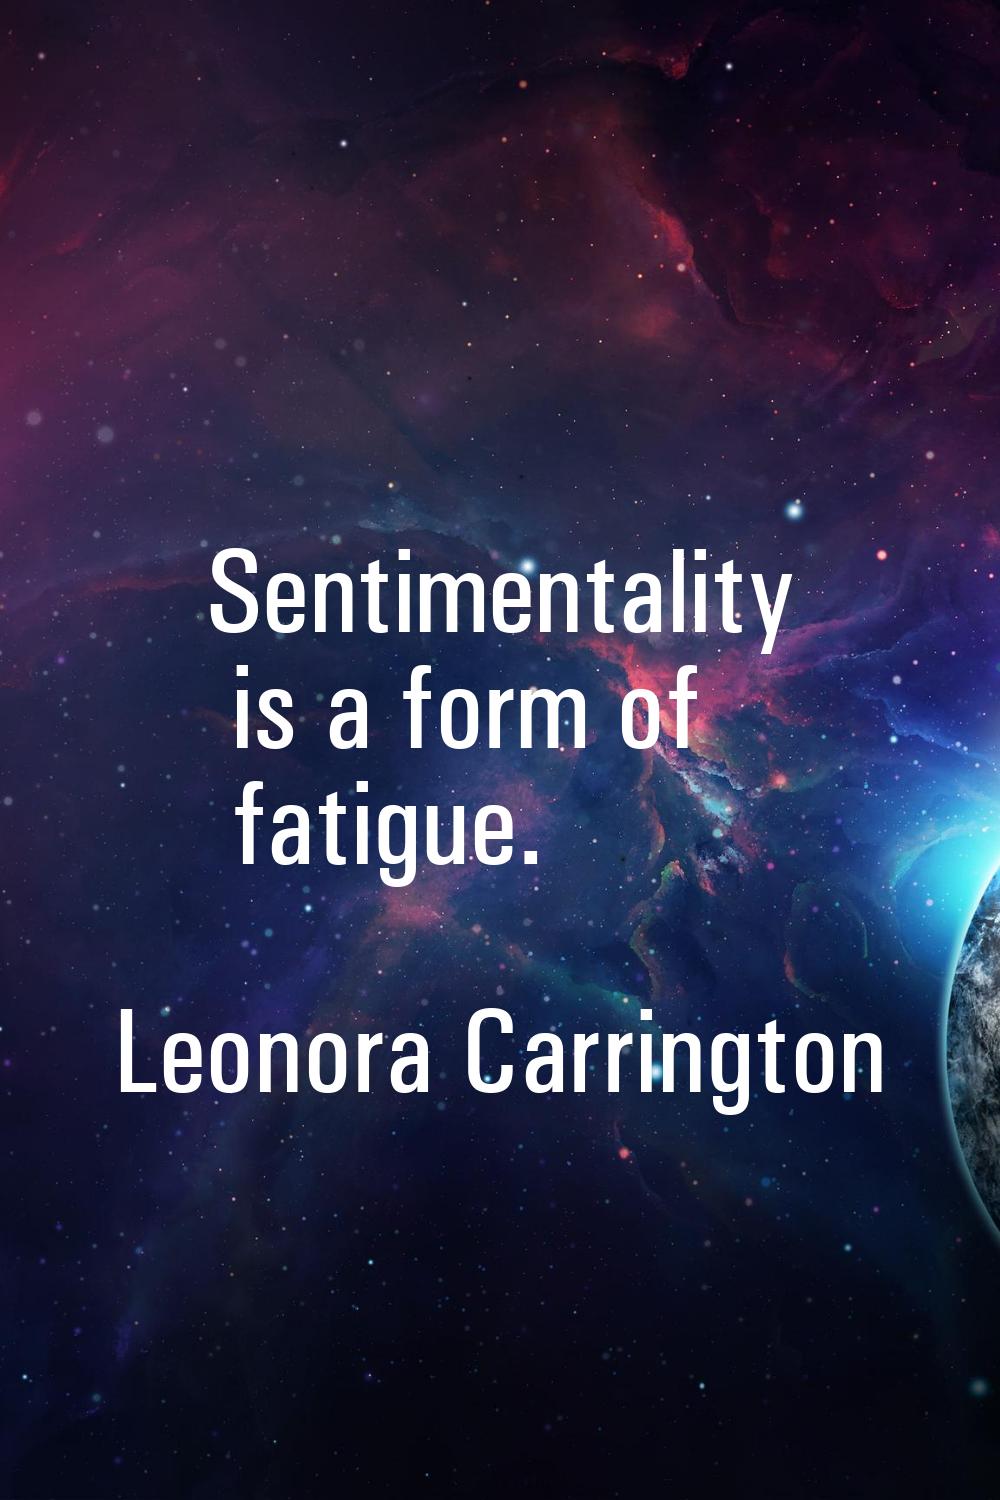 Sentimentality is a form of fatigue.